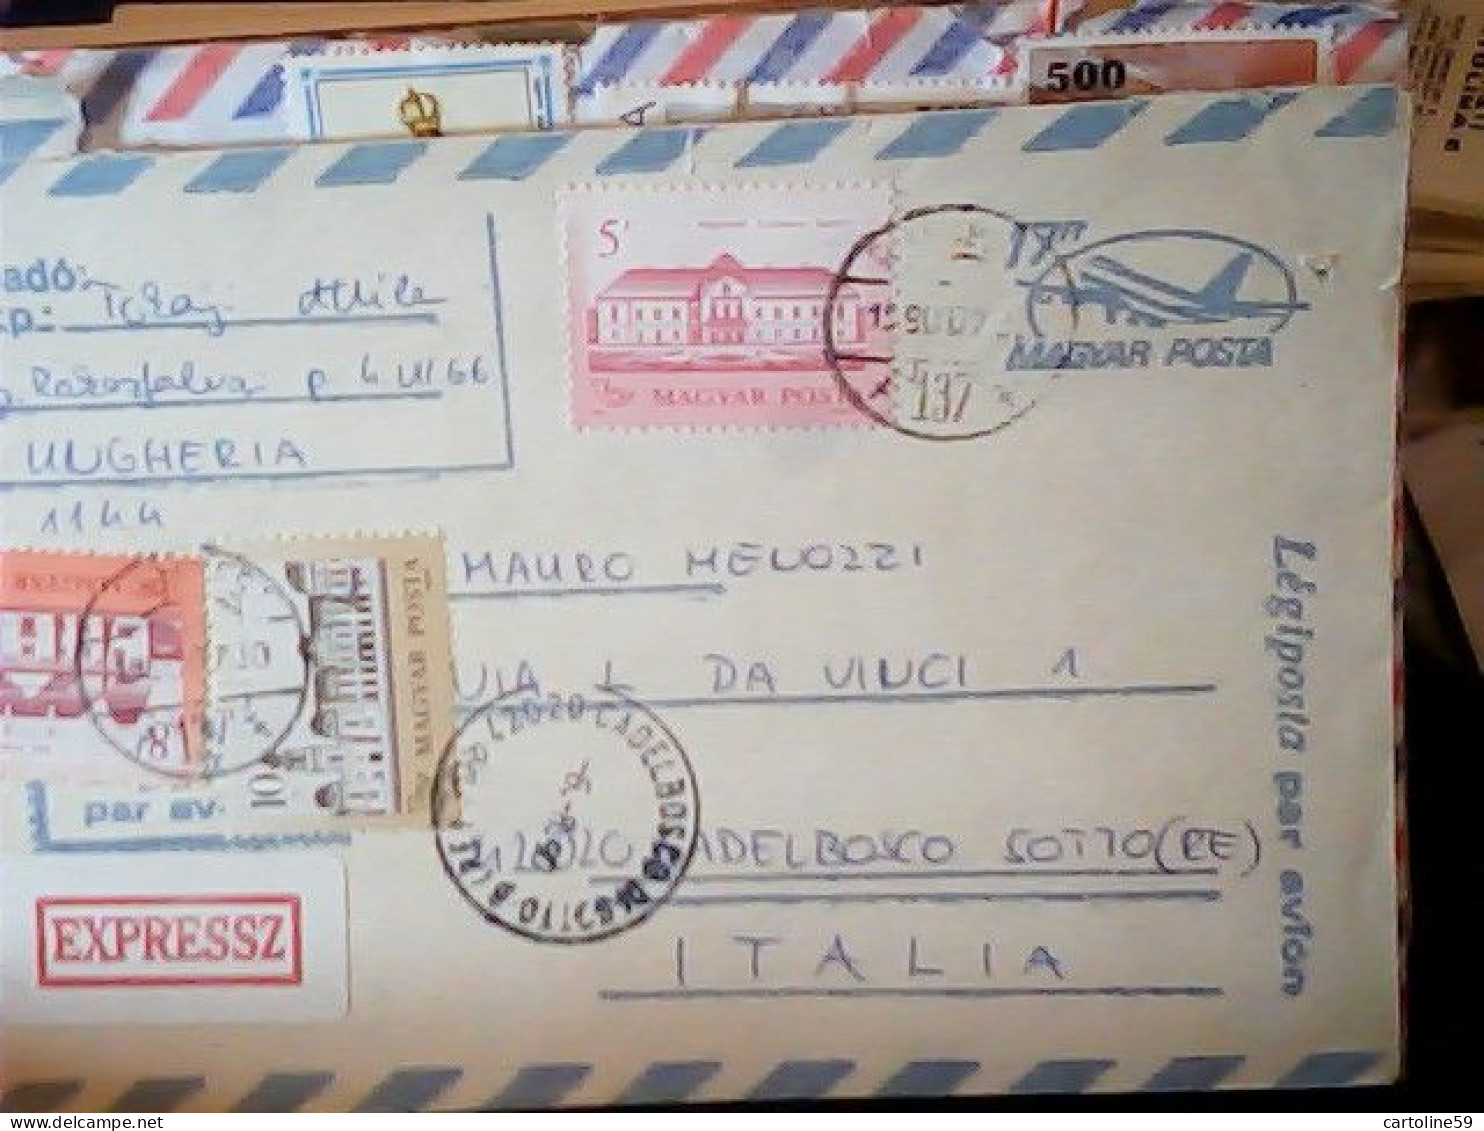 2 BUSTE UNGHERIA (HUNGERY )- MAGYAR 1990 Airmail  3 5 8 10 20 FT JR5043 - Storia Postale